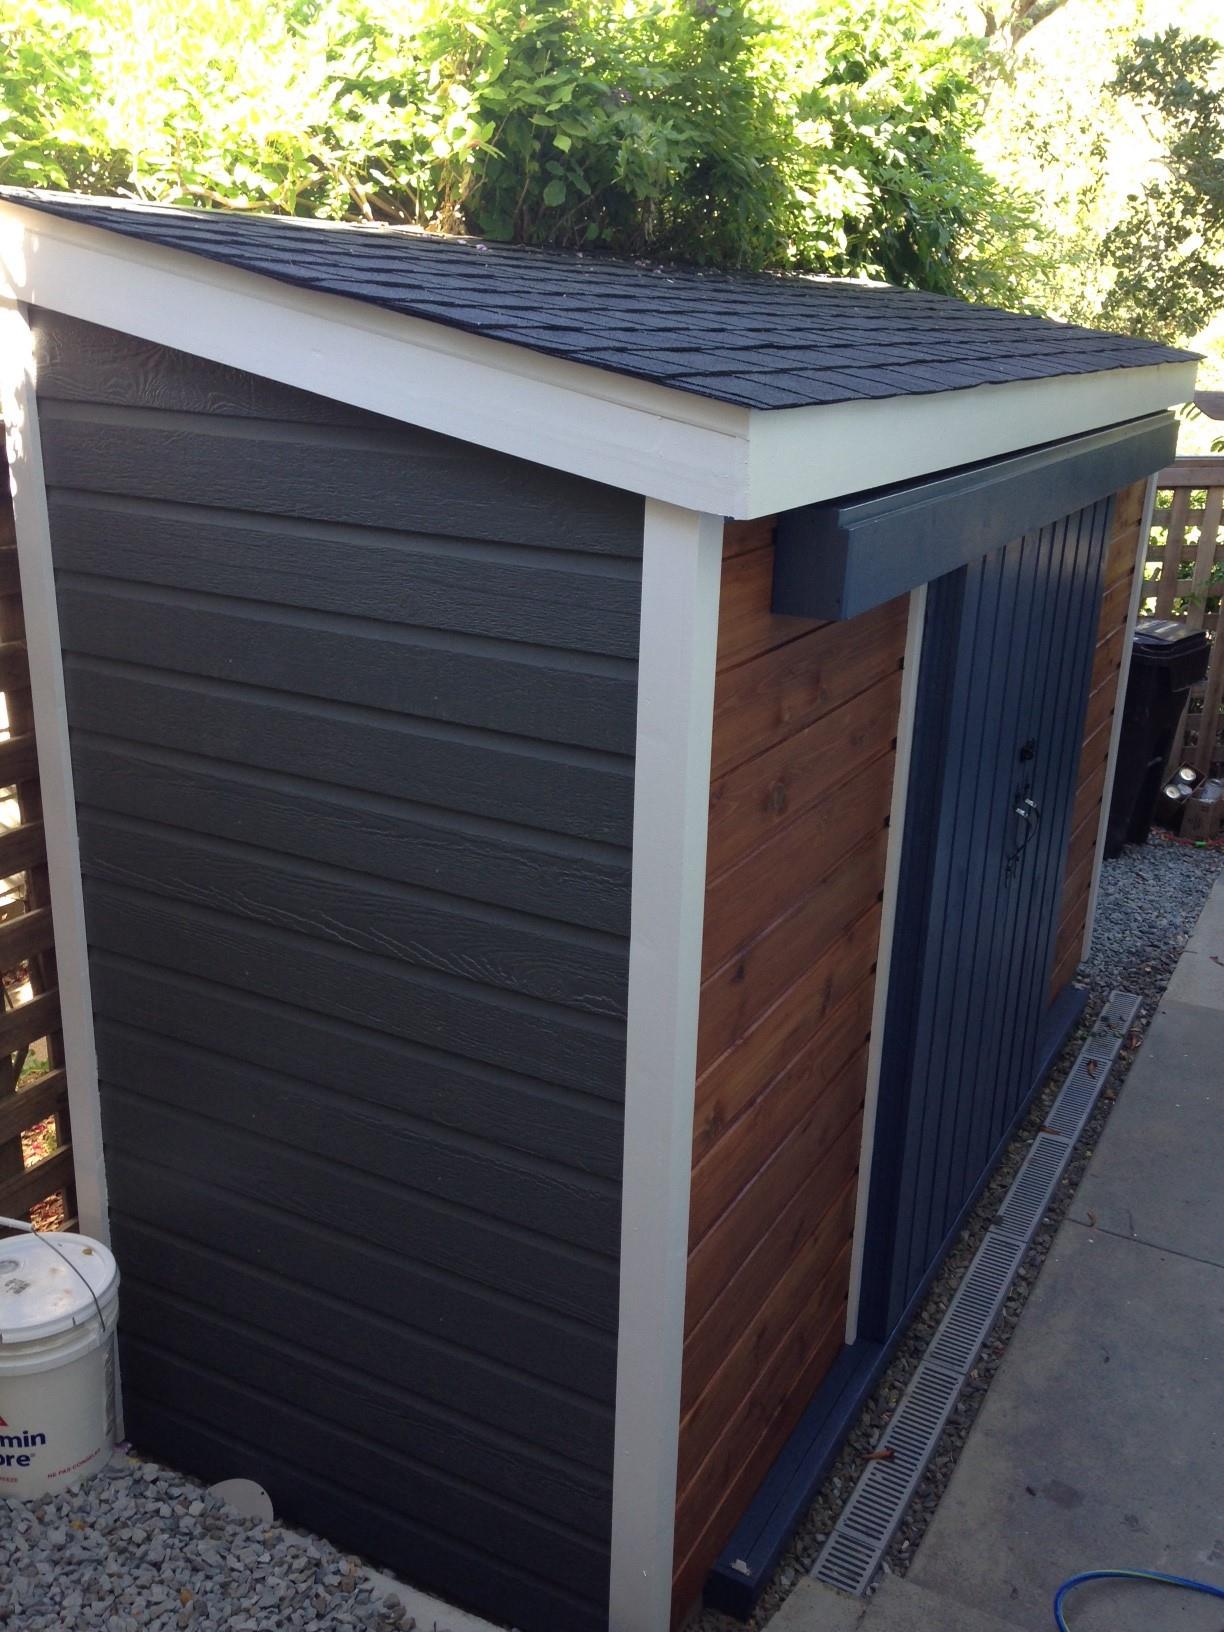 Cedar Sarawak shed 4x12 with sliding double doors in Mill Valley, California. ID number 178096-2